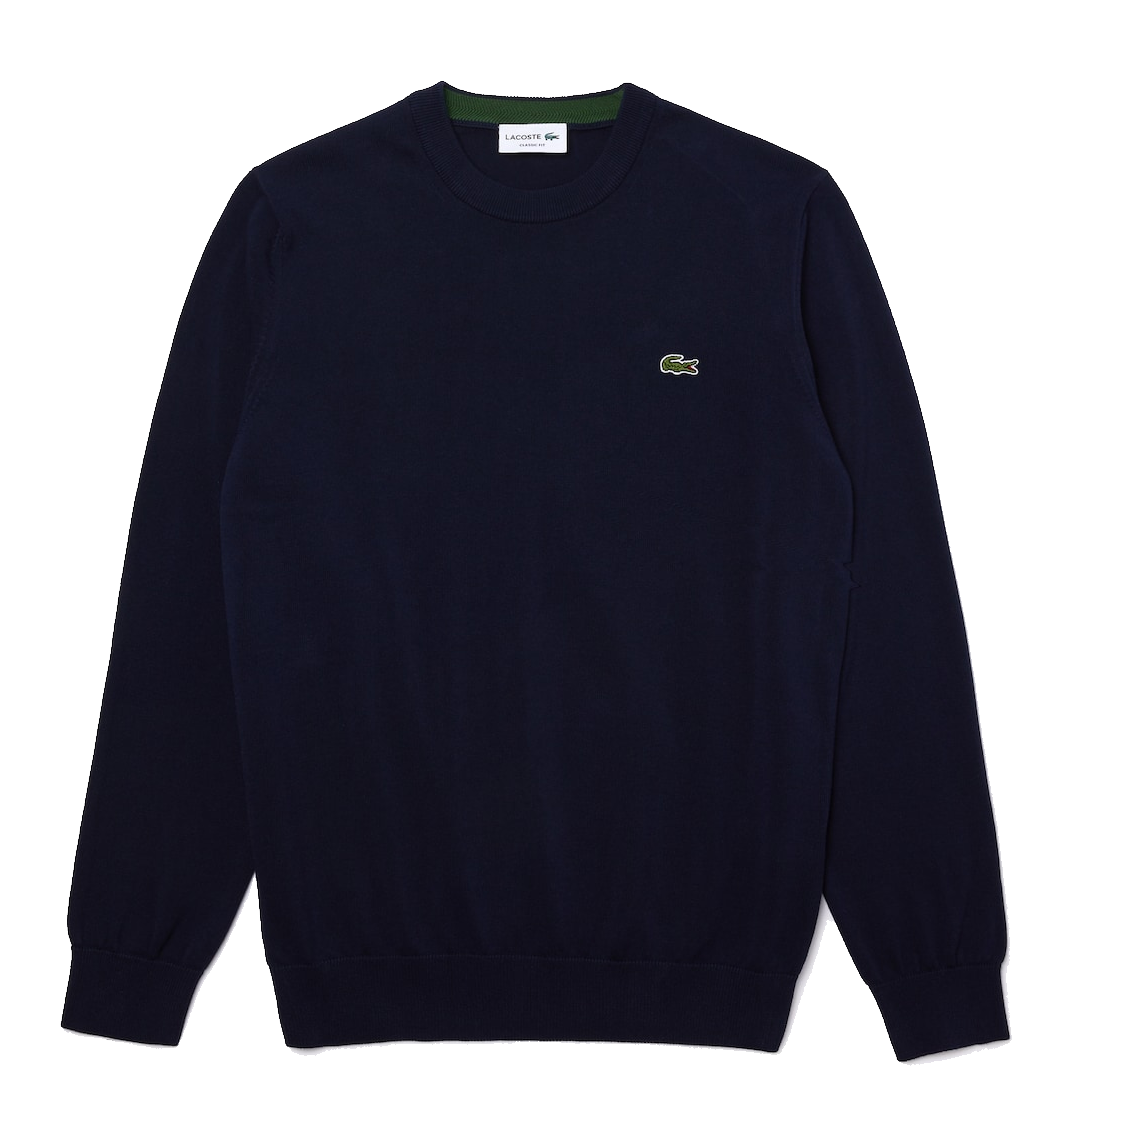 Lacoste Lacoste Organic Cotton Sweater Round Neck Navy Blue